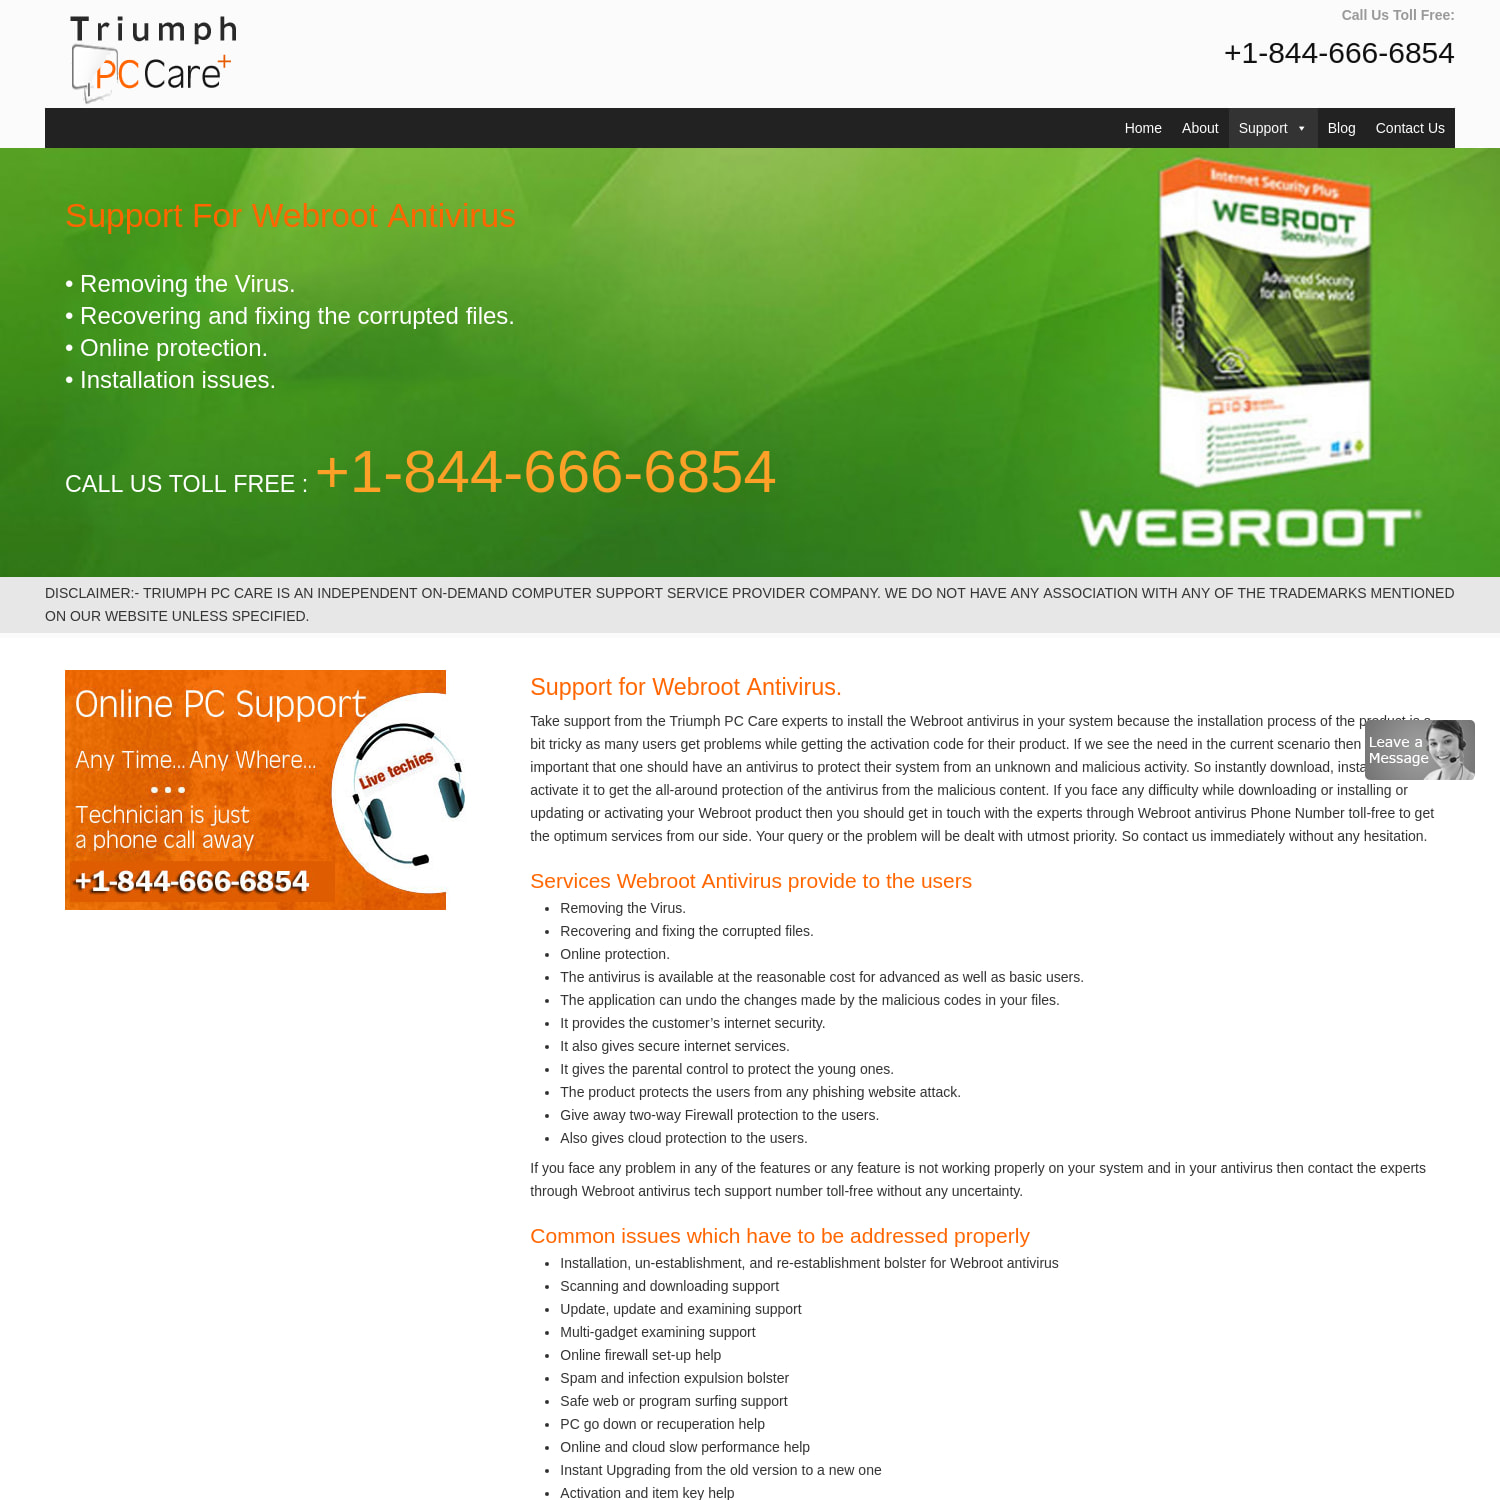 Support For Webroot Antivirus +1-844-666-6854, Webroot Support Number